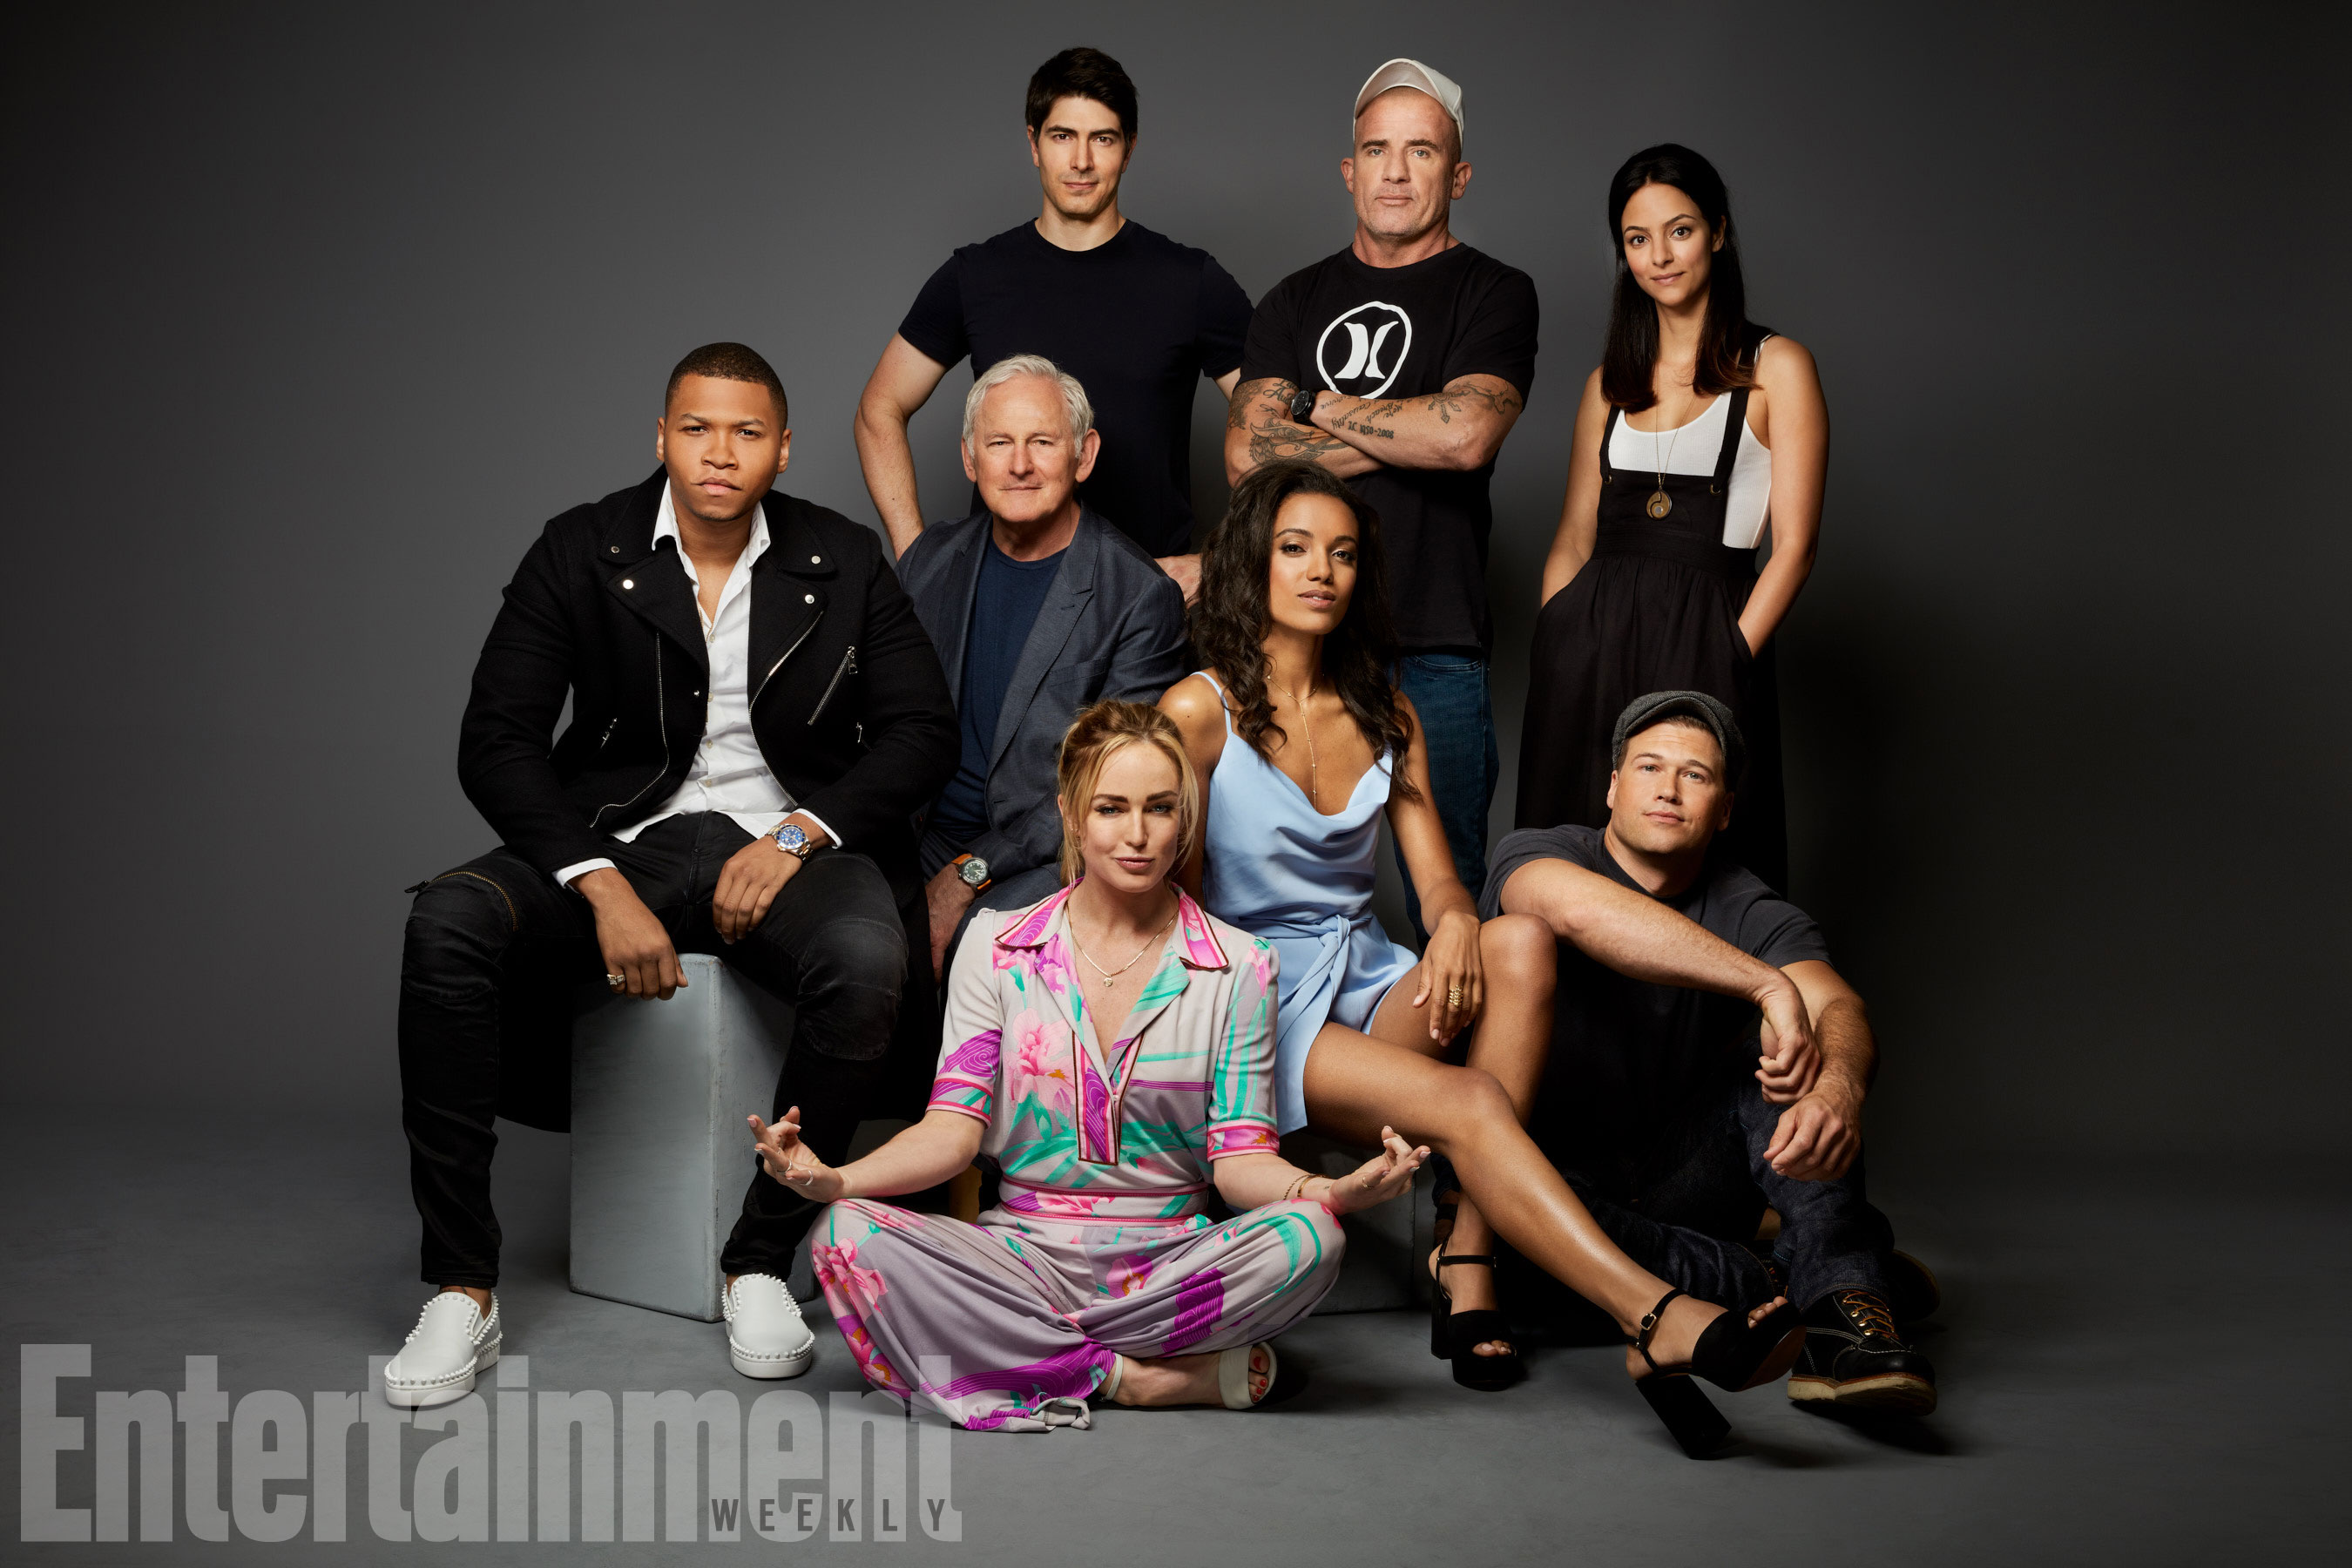 Tala Ashe, Brandon Routh, Dominic Purcell, Franz Drameh, Victor Garber, Caity Lotz, Maisie Richardson-Sellers, Nick Zano (DC‘s Legends of Tomorrow)